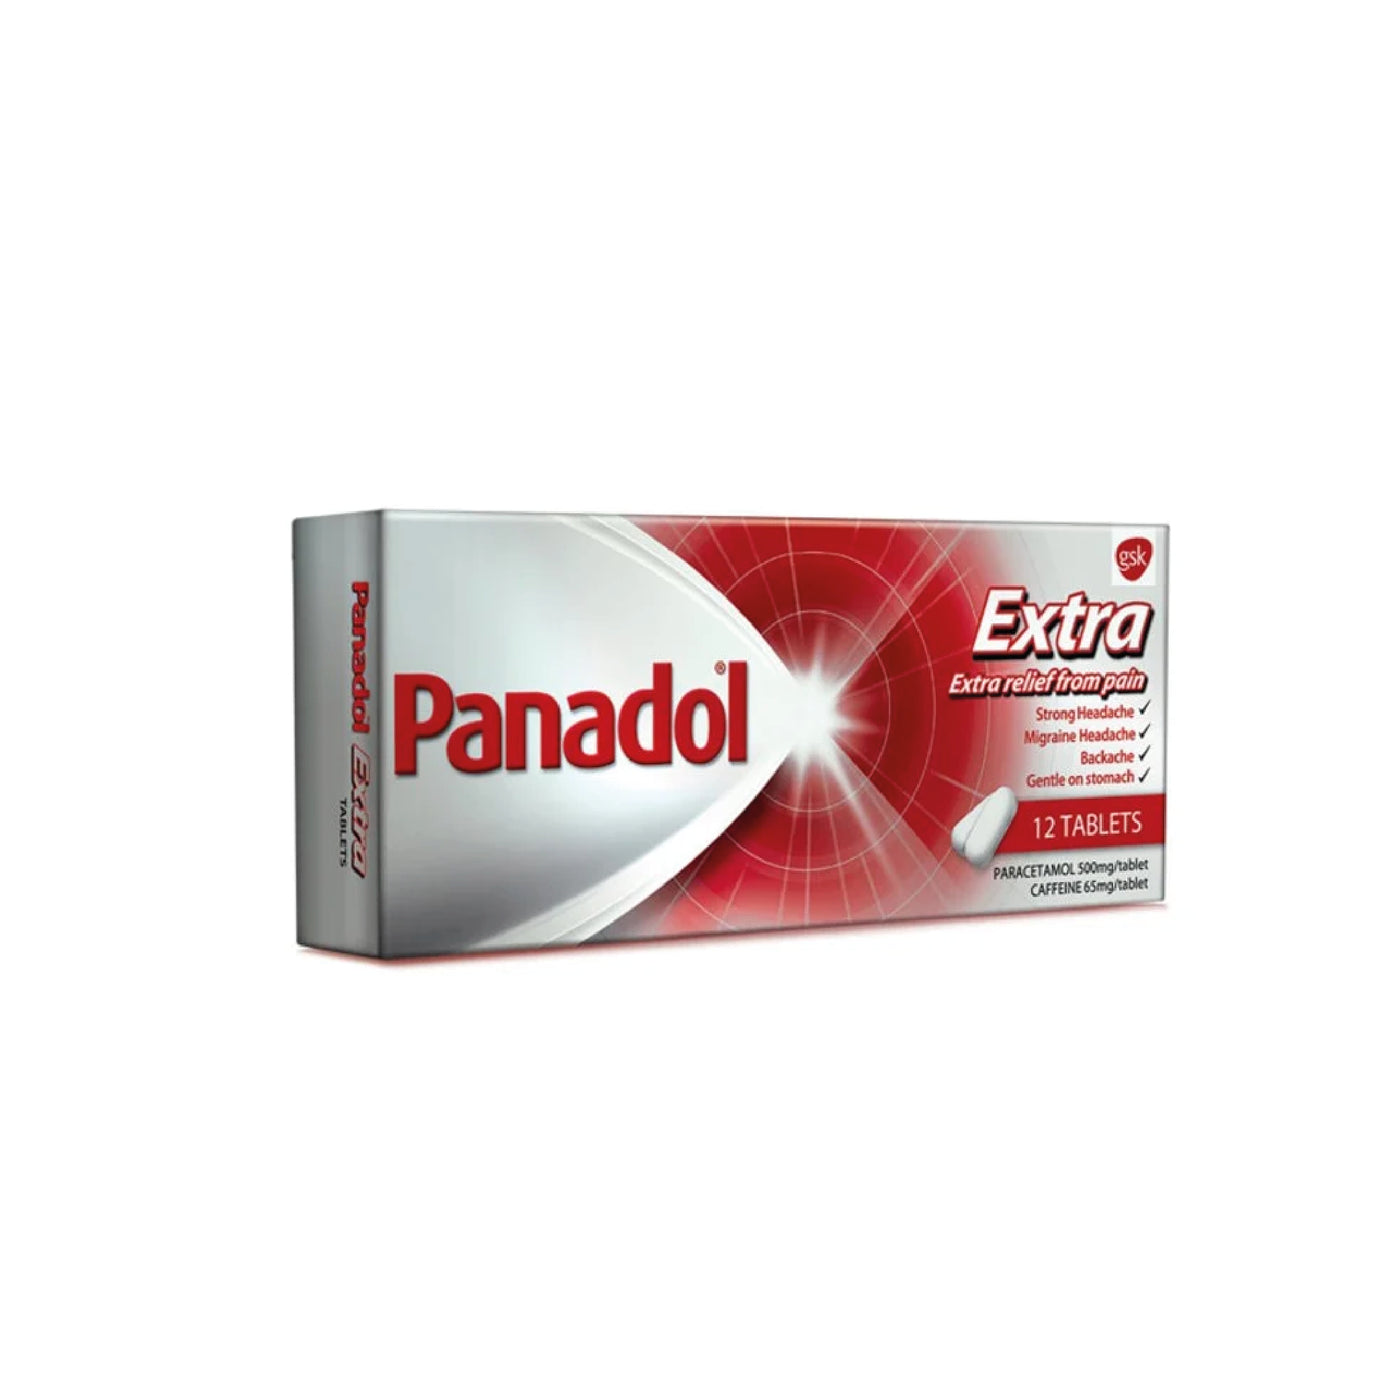 PANADOL EXTRA 500mg TABLET 12's